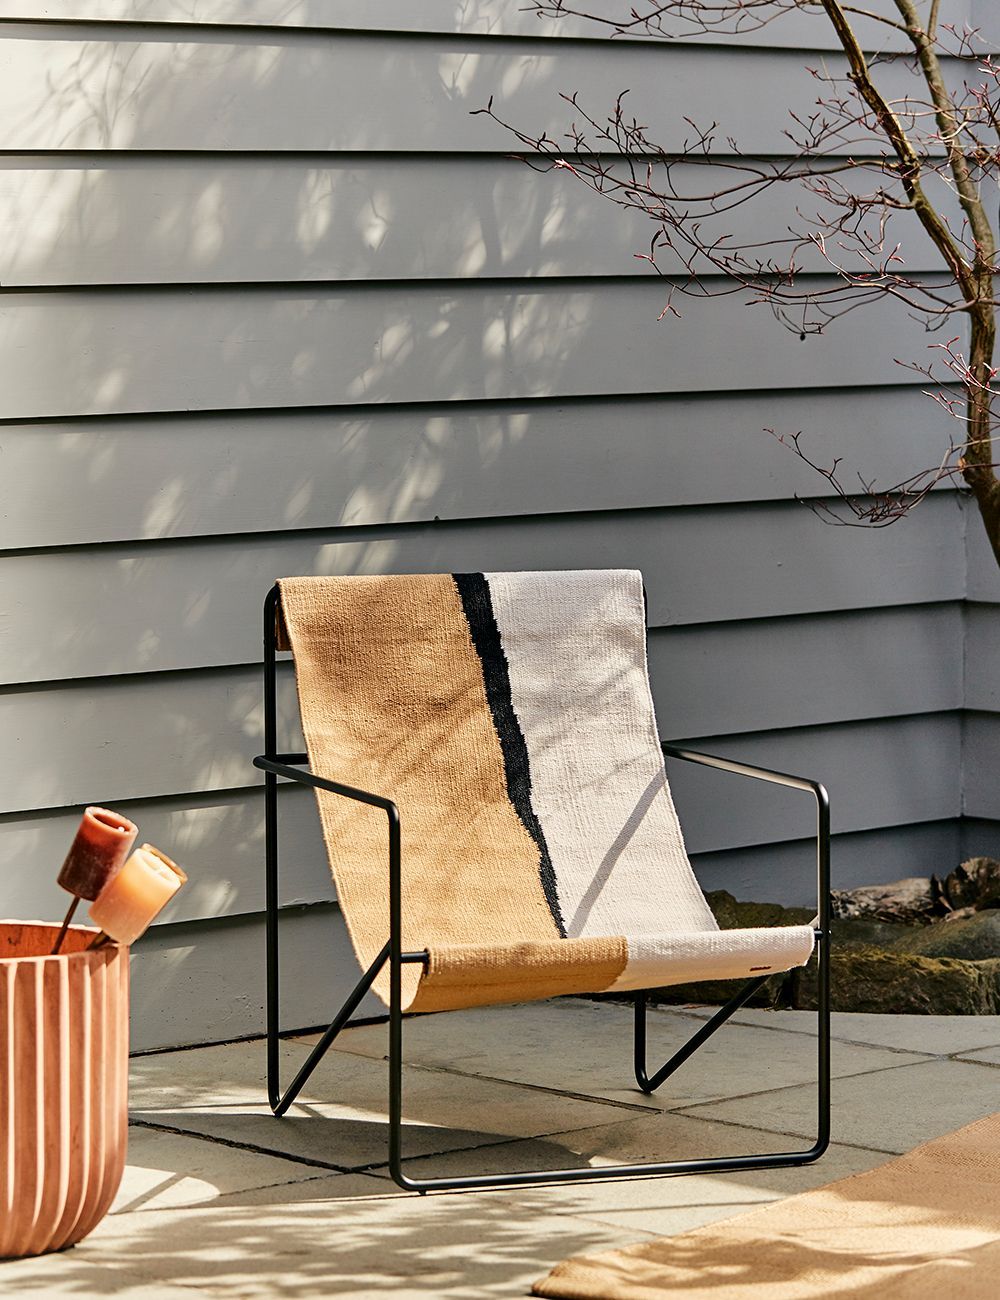 Outdoor Comfort: Relax in Style with Garden Chairs